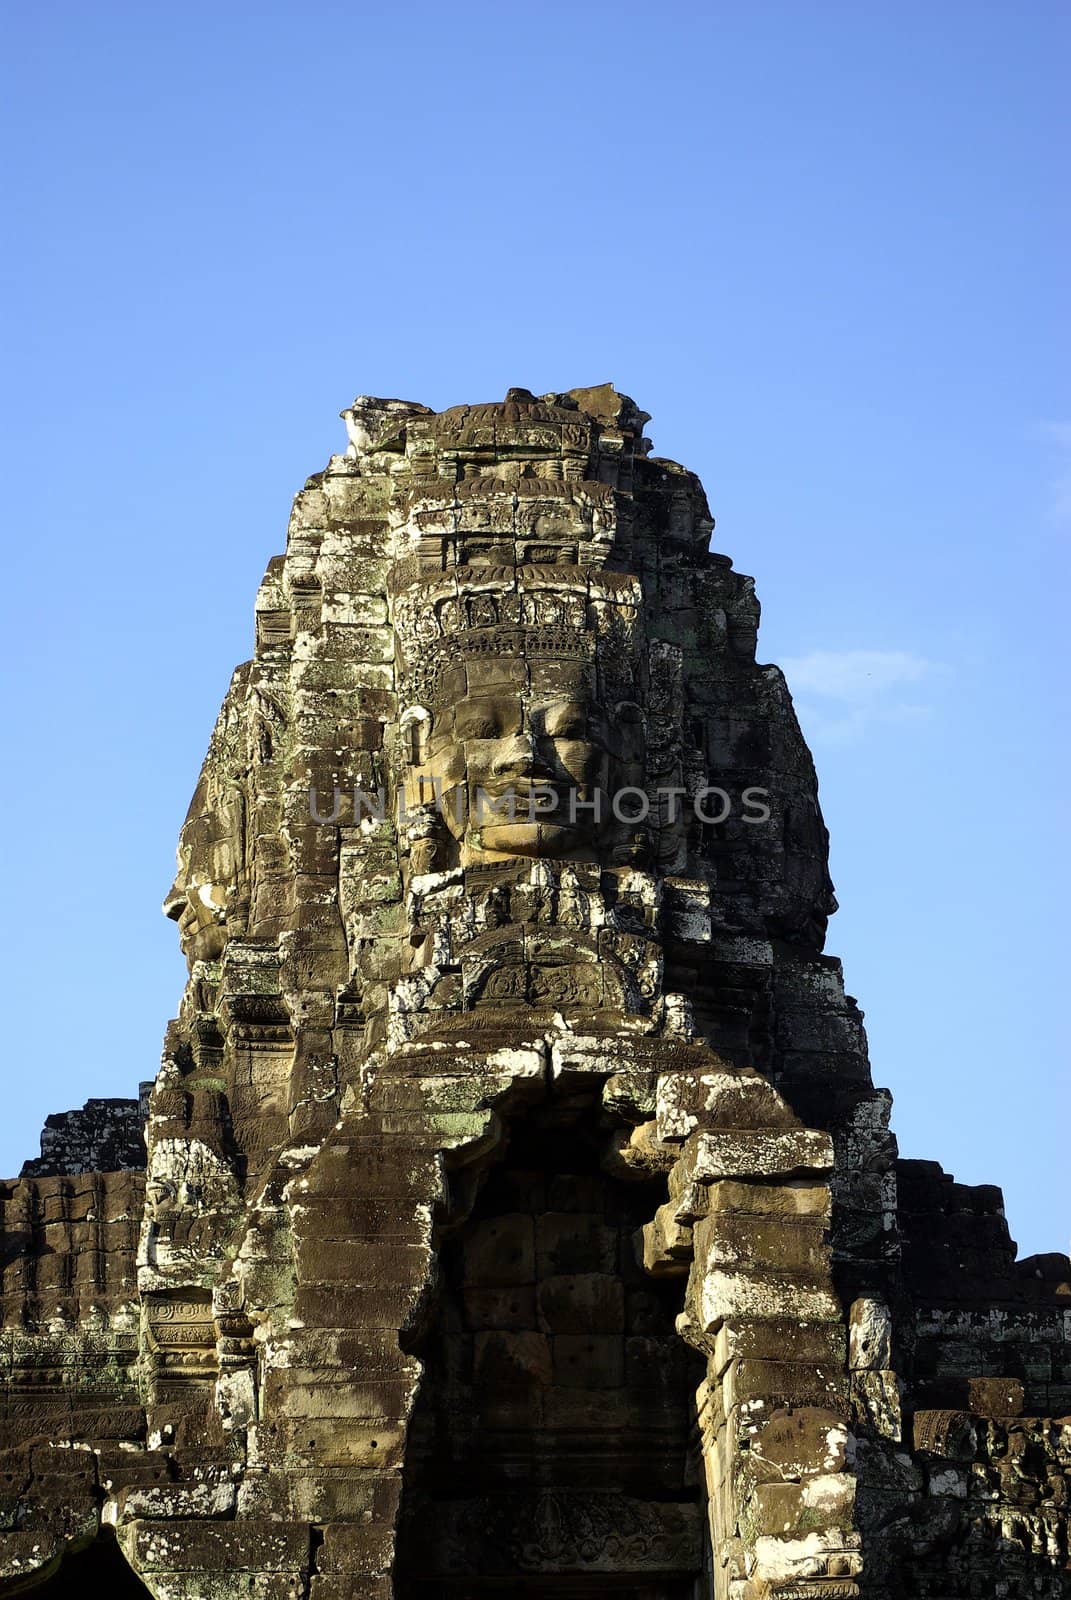 Tower of the Bayon temple in Angkor by shkyo30